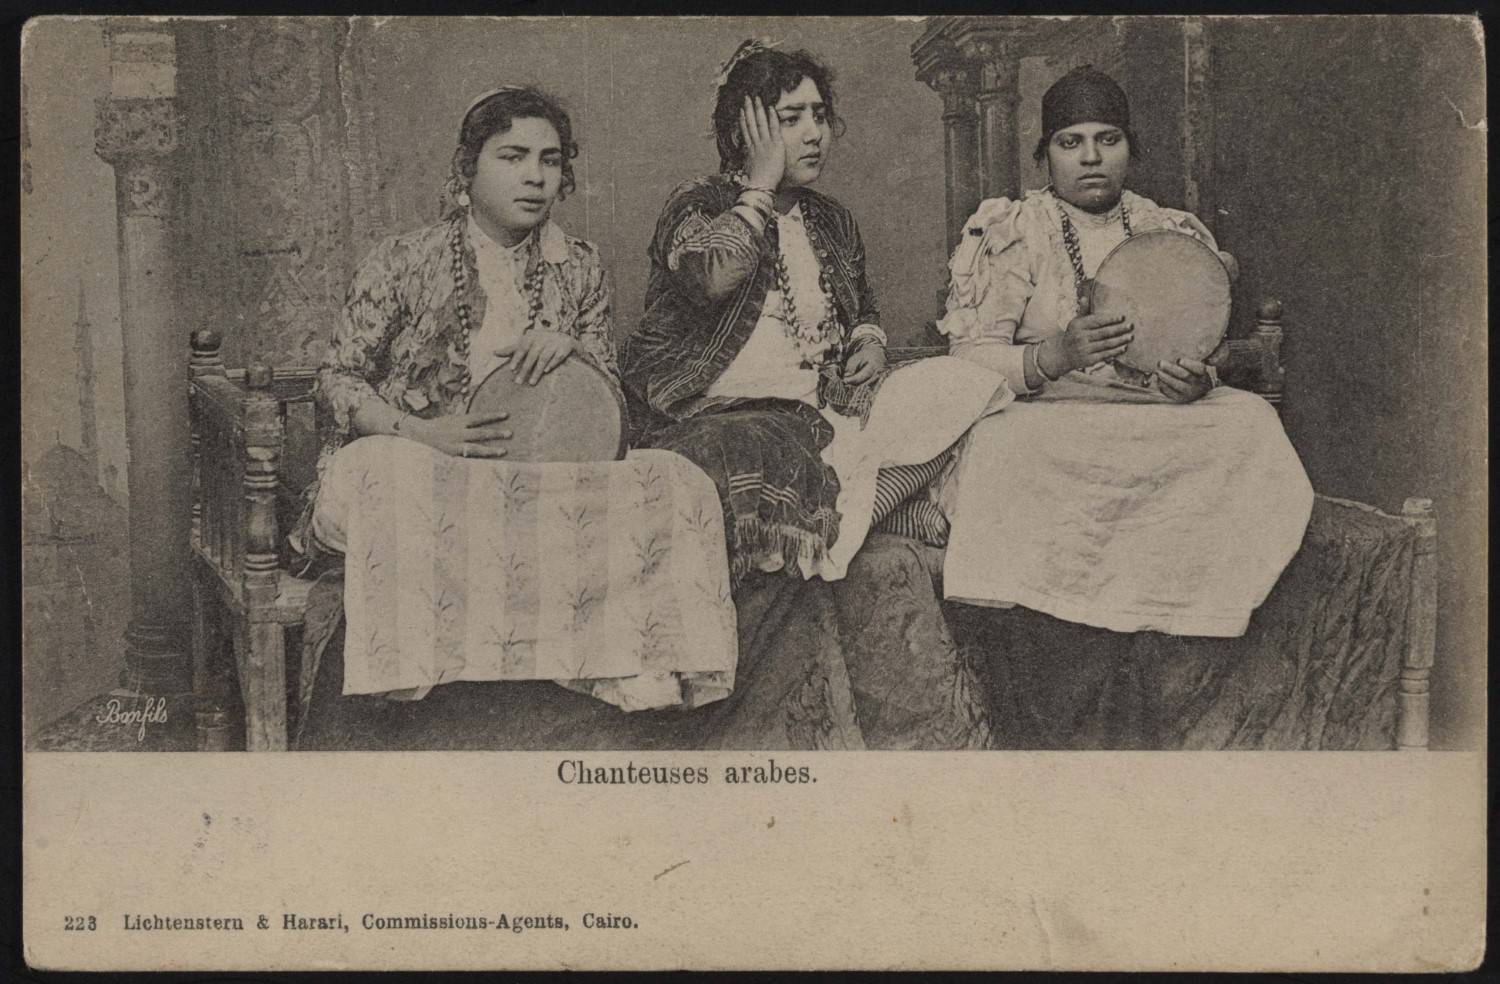 Postcard of female Arab singers ("Chanteuses arabes"), Cairo, March 23, 1905